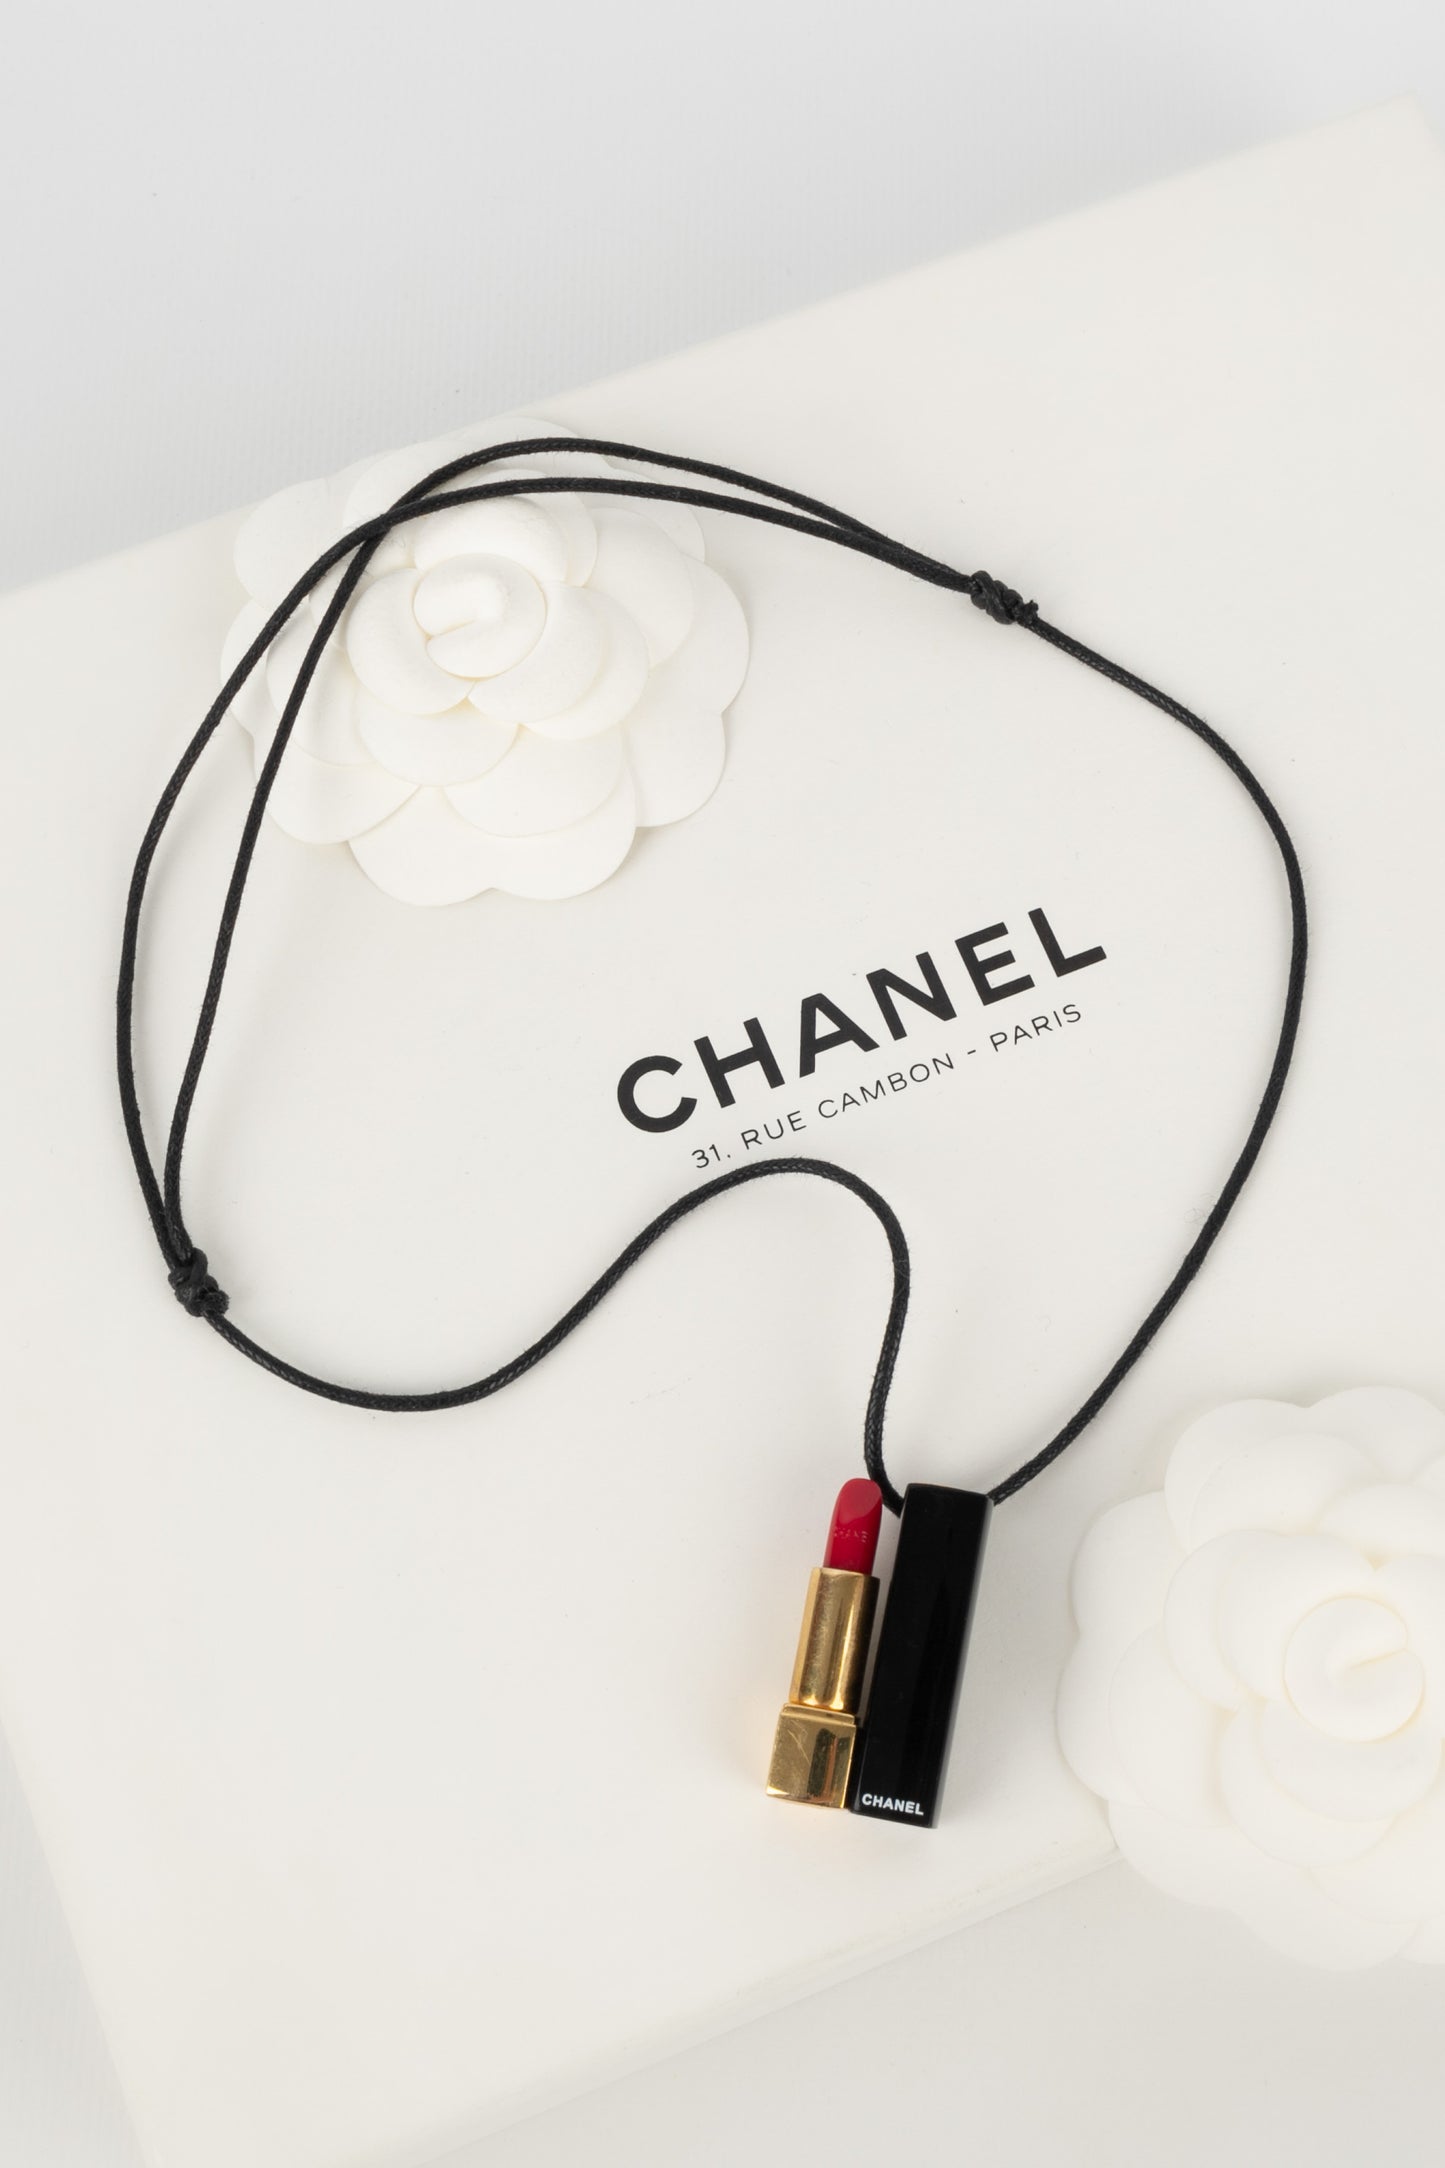 Collier "Make Up" Chanel